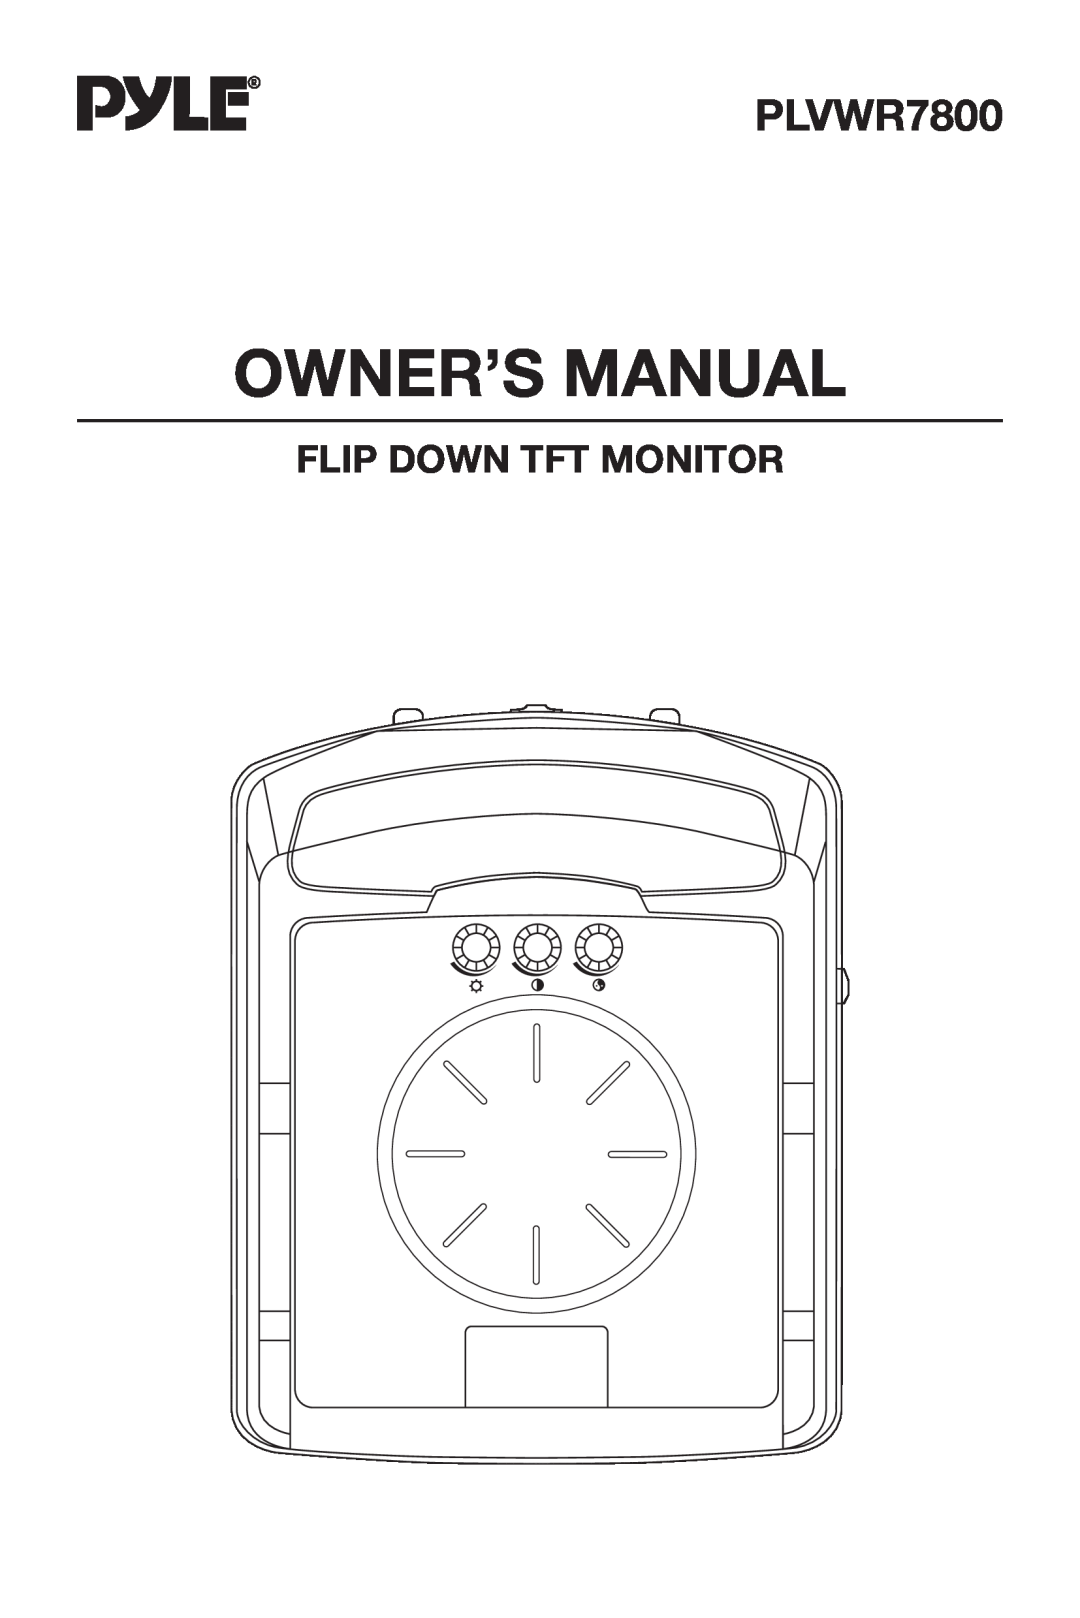 PYLE Audio PLVWR7800 owner manual Owner’S Manual, Flip Down Tft Monitor 